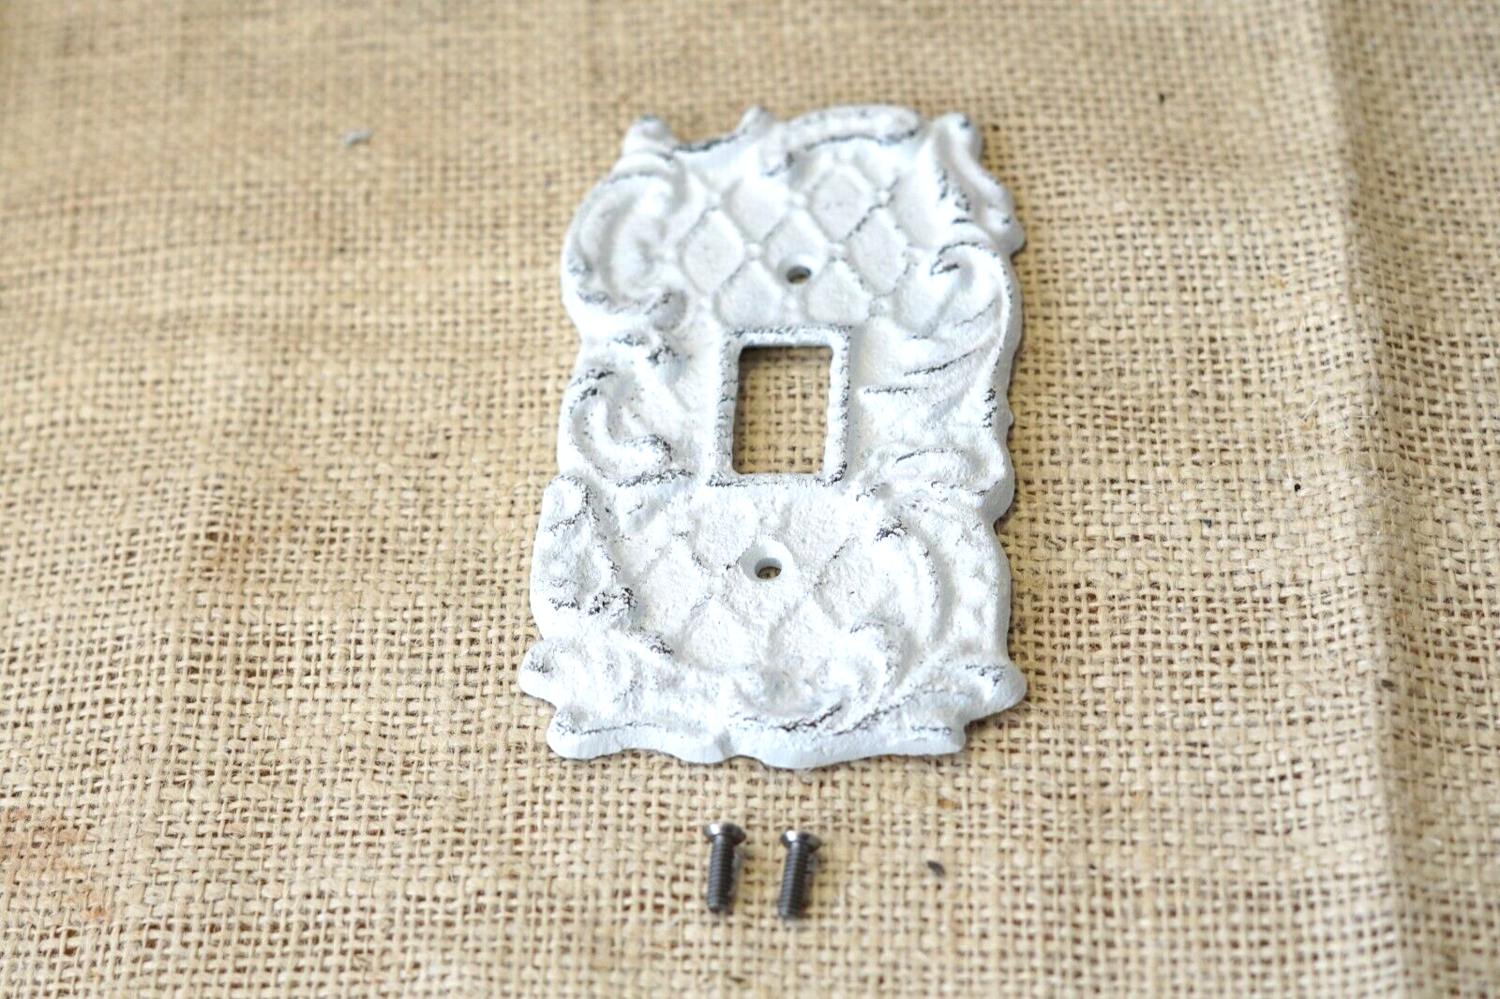 CAST IRON DISTRESSED WHITE LIGHT SWITCH PLATE COVER